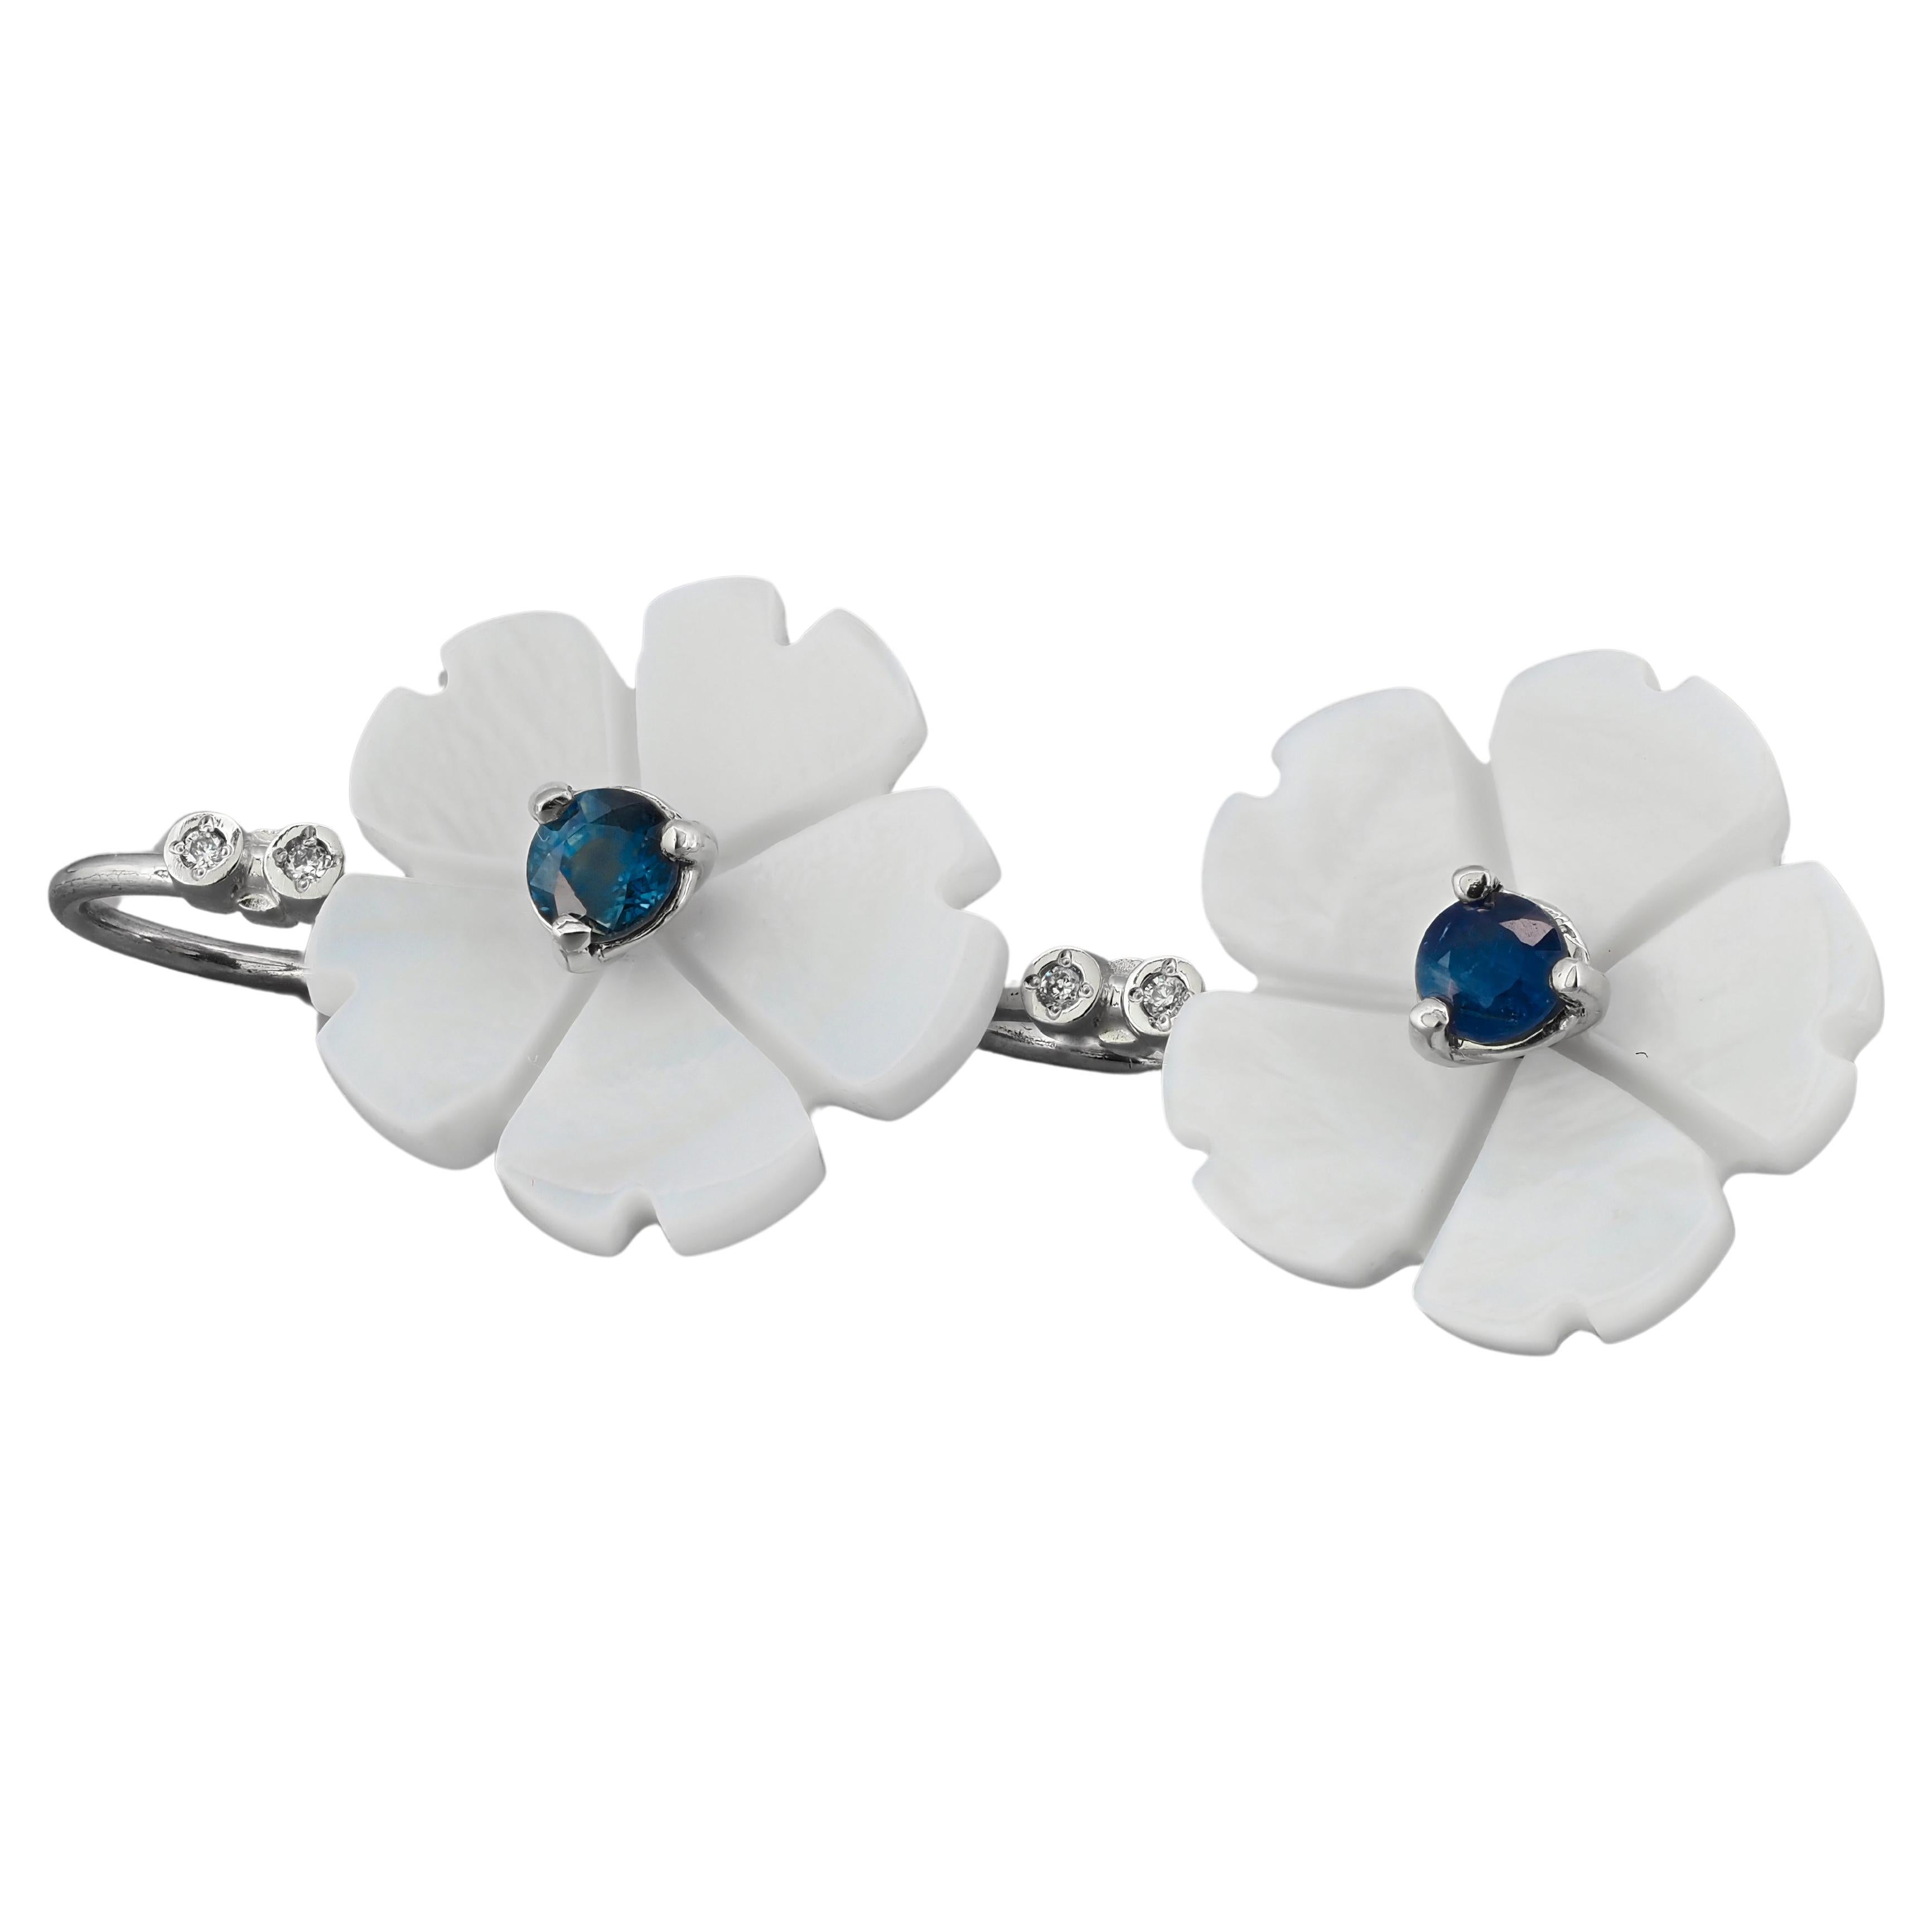 Flower 14k gold earrings with blue sapphires.  For Sale